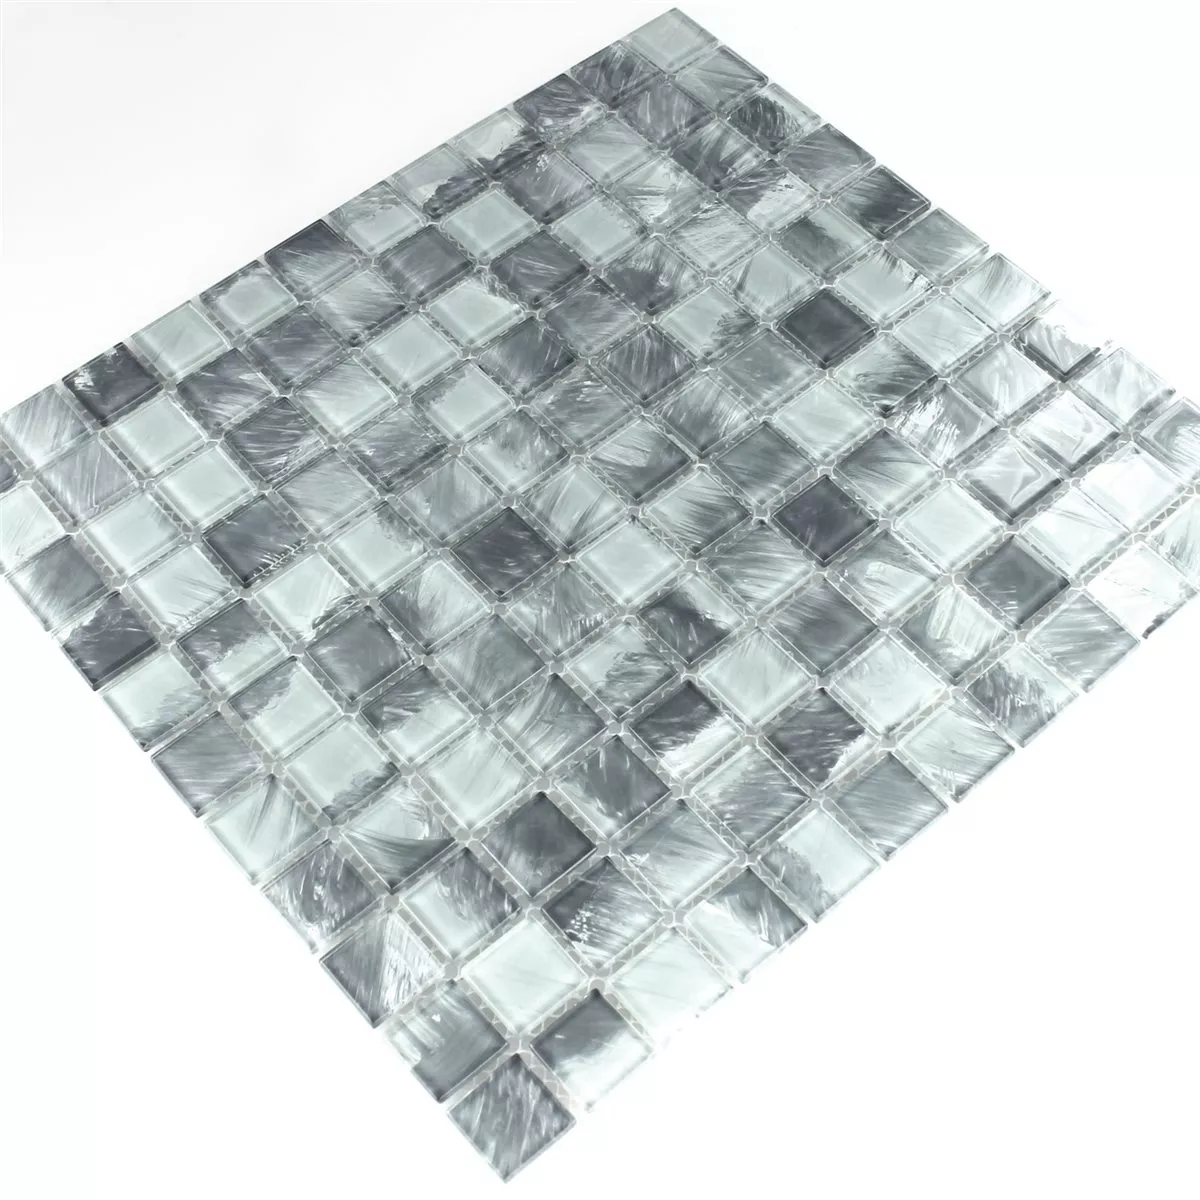 Sample Mosaic Tiles Glass Grey Marbled